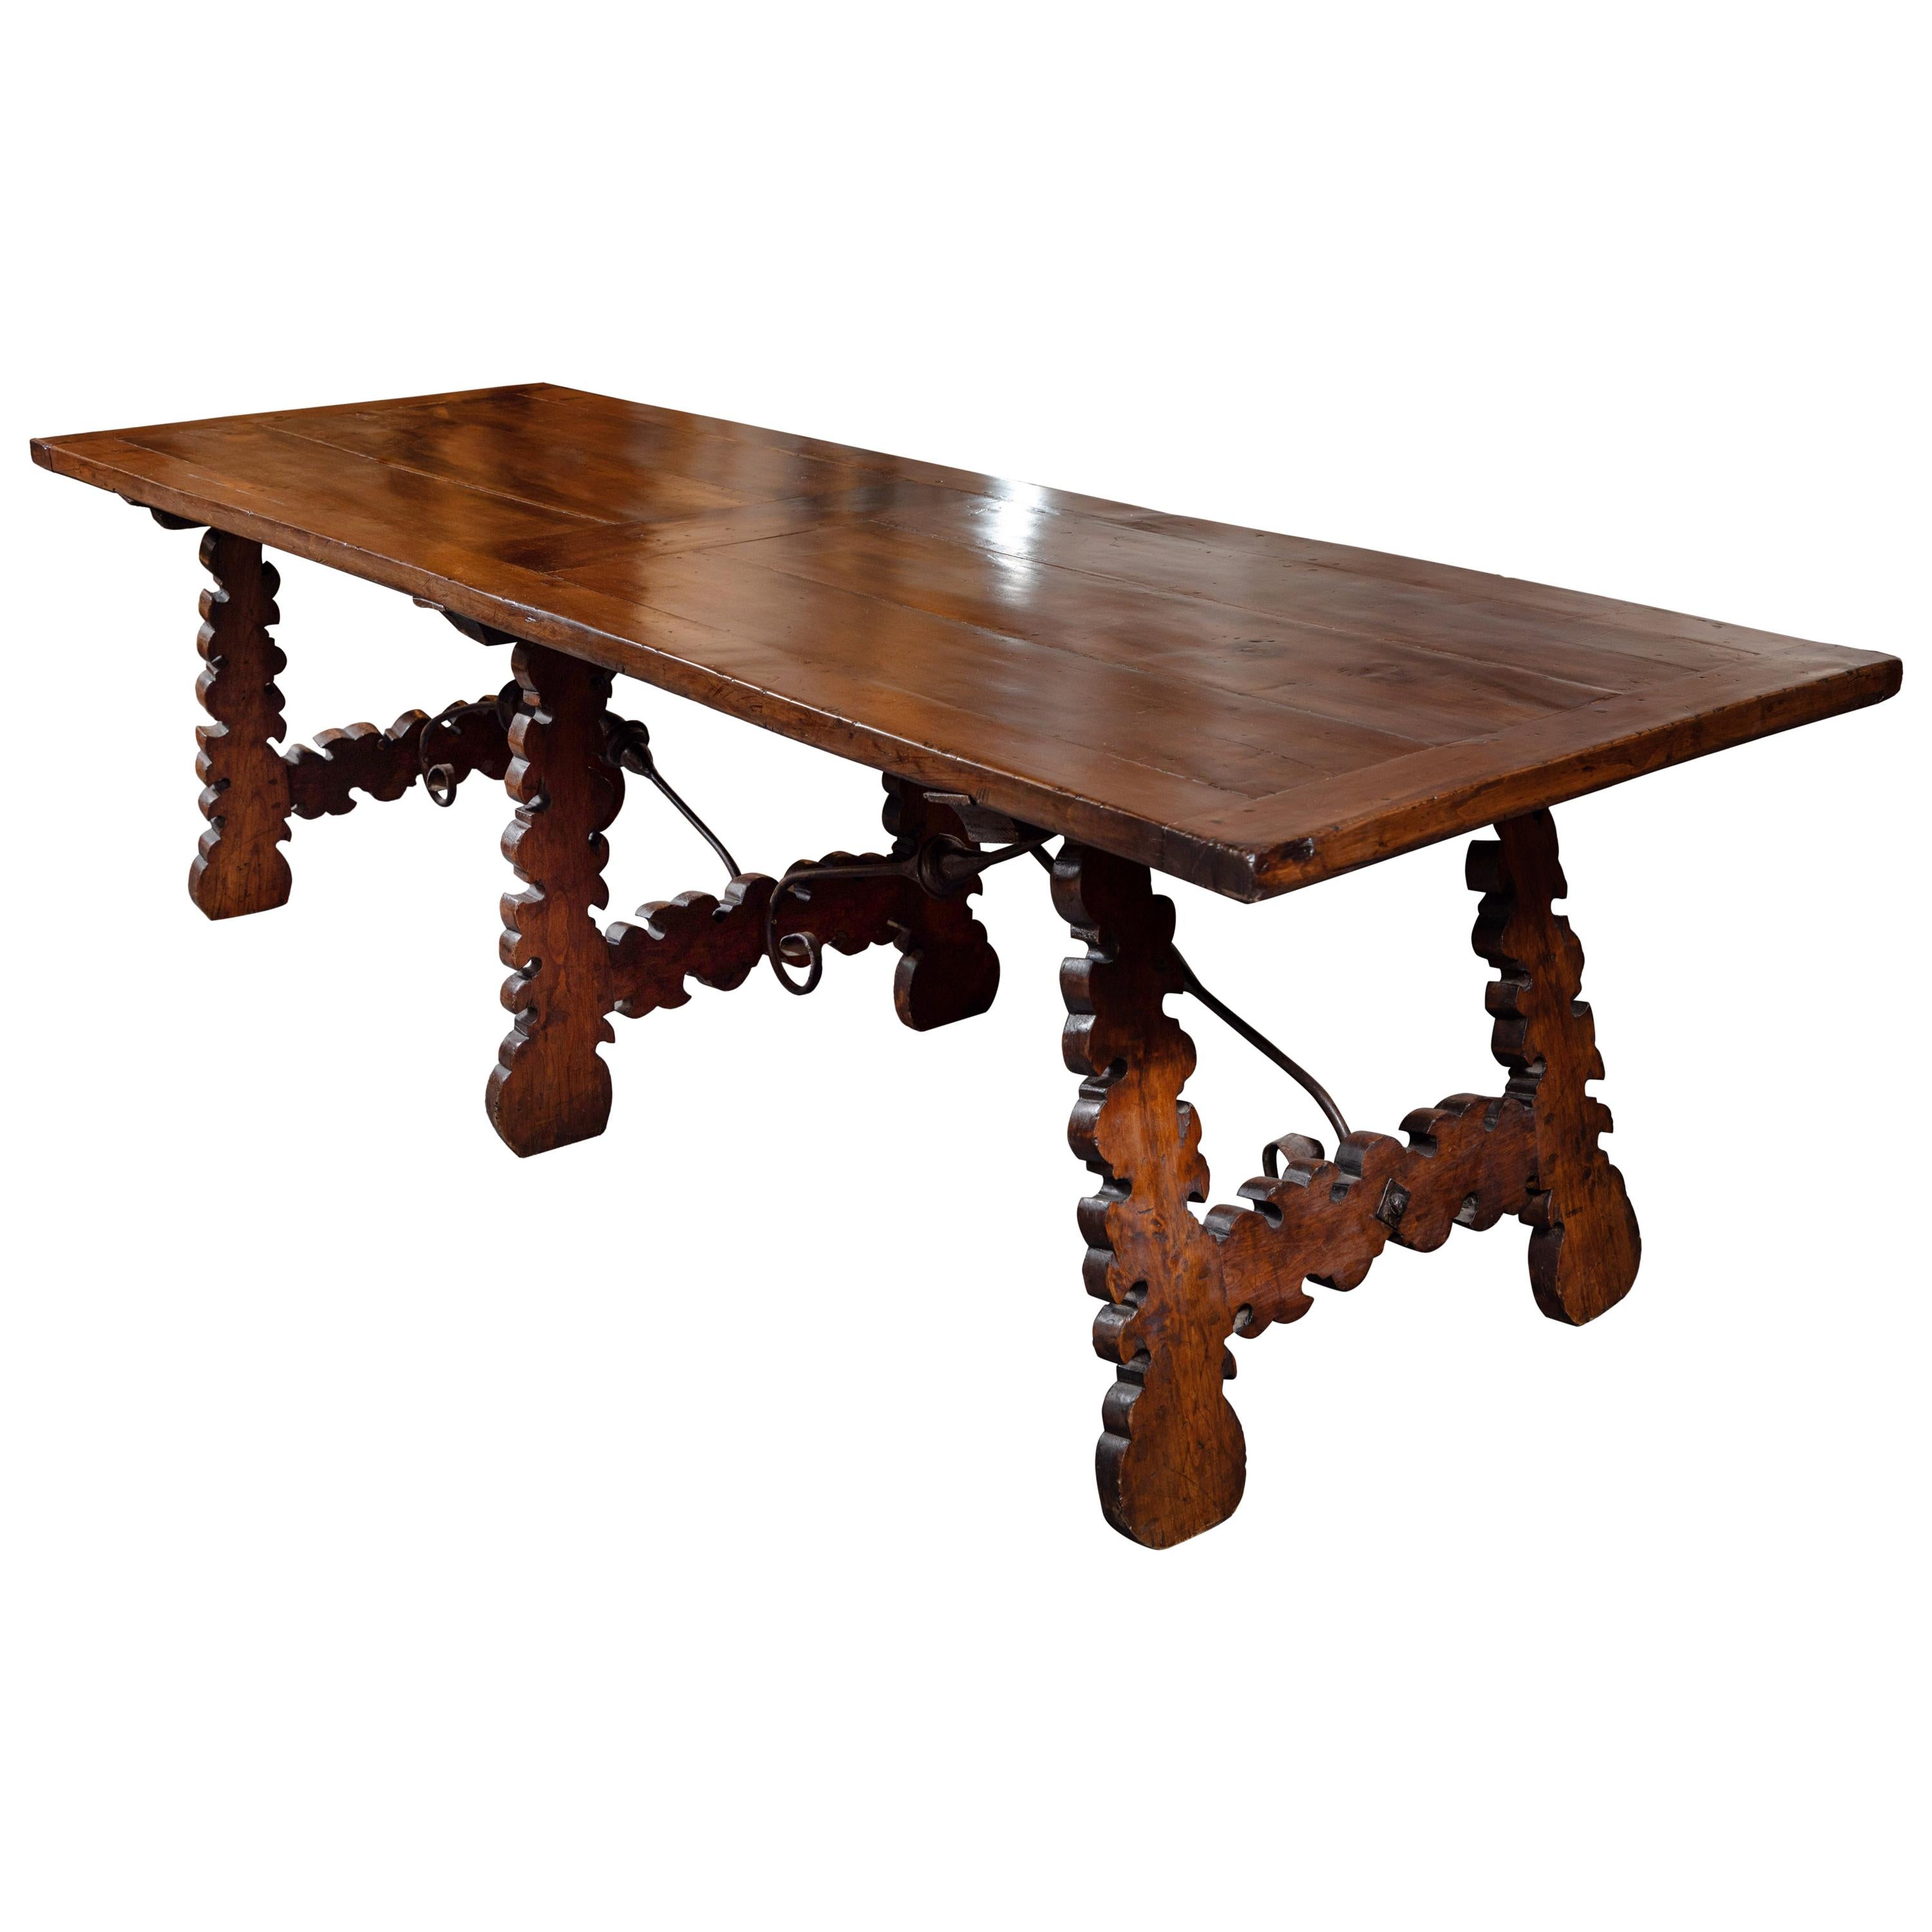 Large, Tuscan, Walnut Dining Table